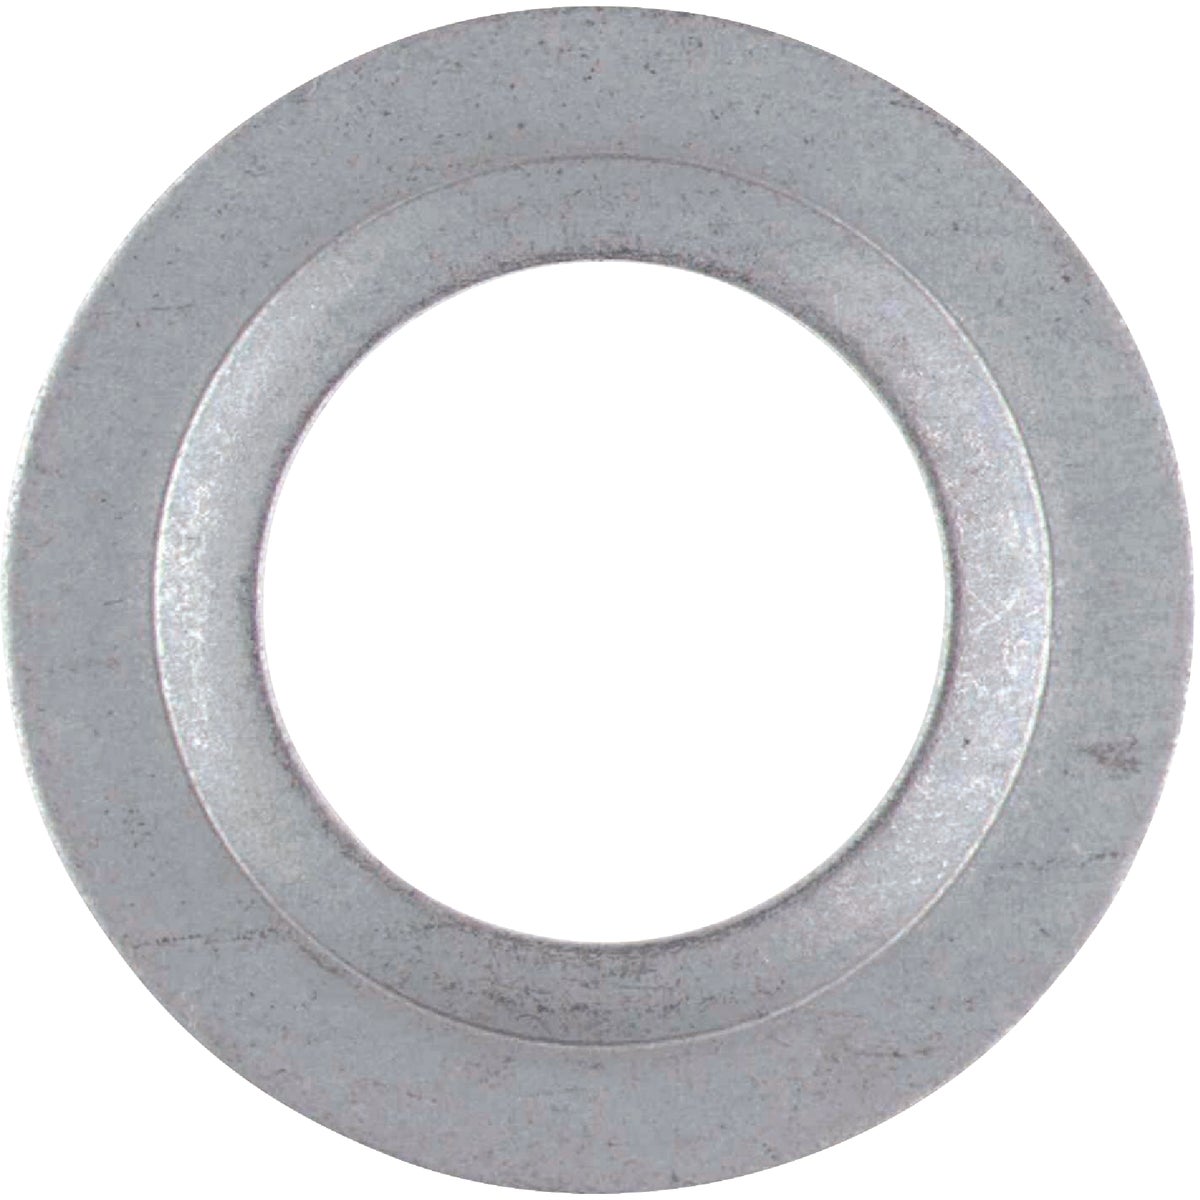 Halex 2 In. to 1-1/2 In. Plated Steel Rigid Reducing Washer